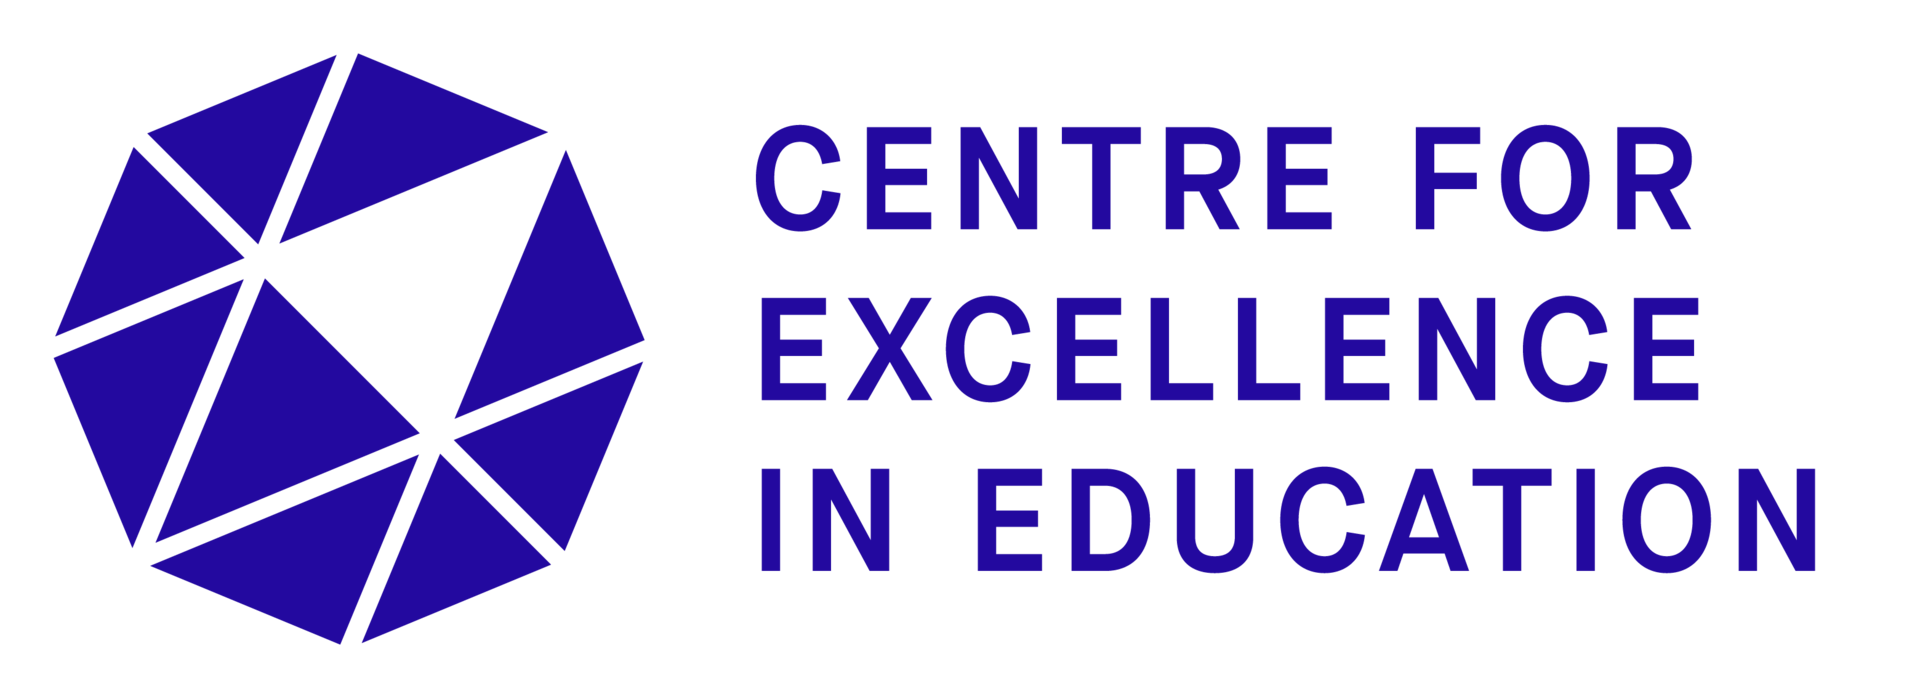 Centres for Excellence in Education. Logo.